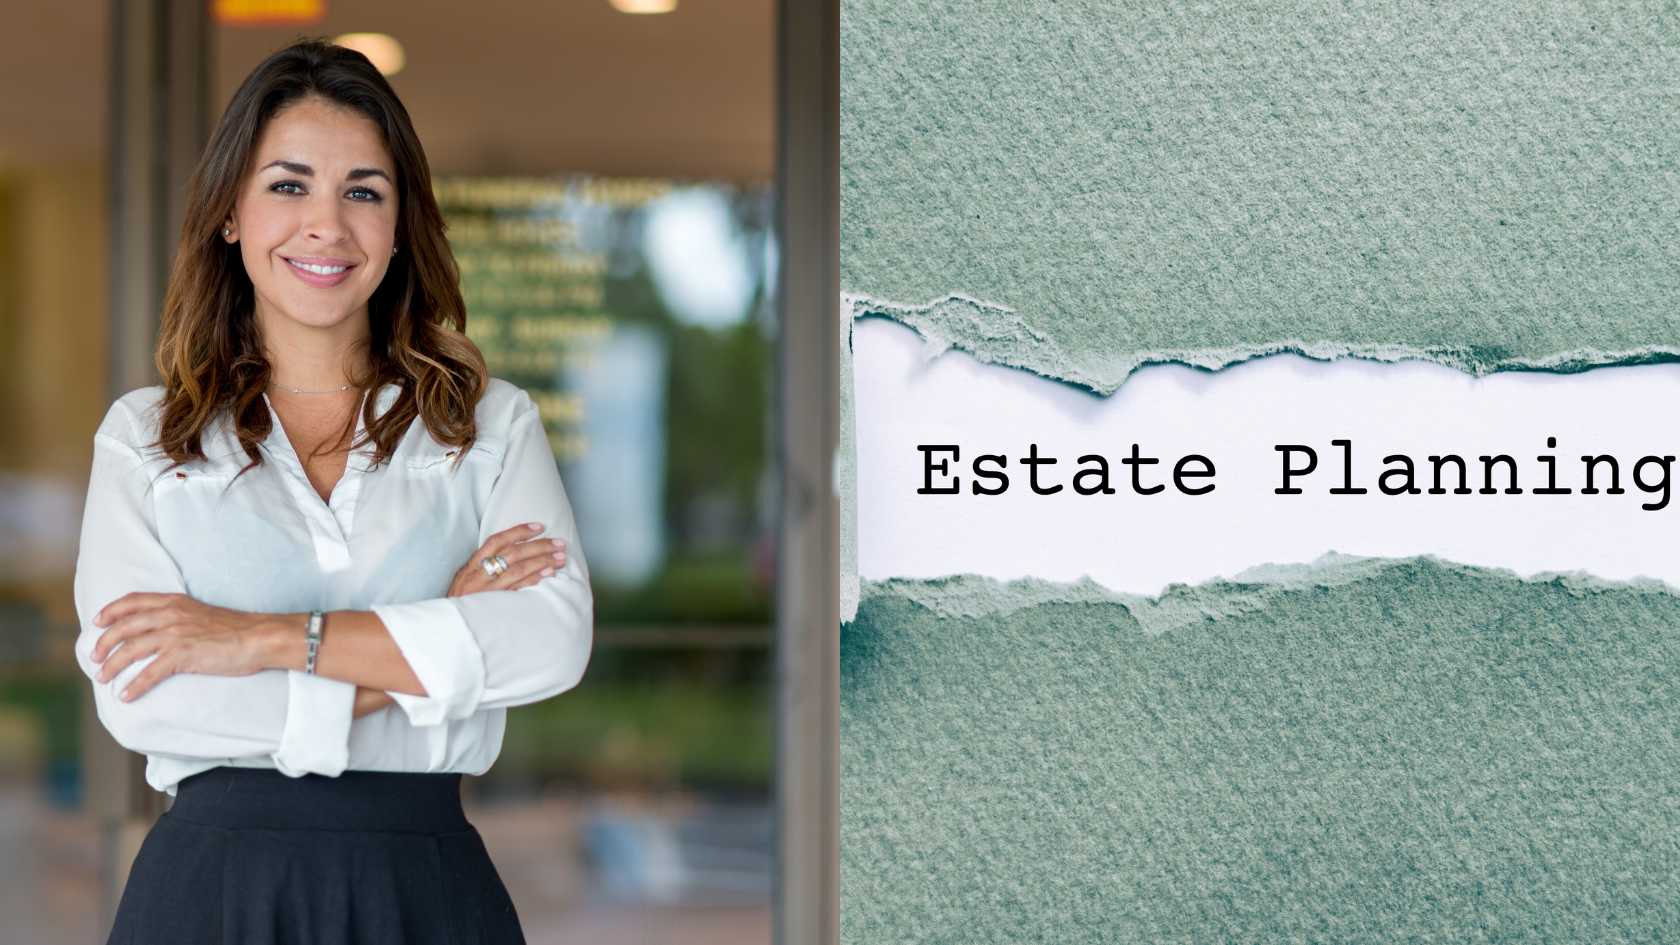 Woman on left smiling "Estate Planning" on the right/